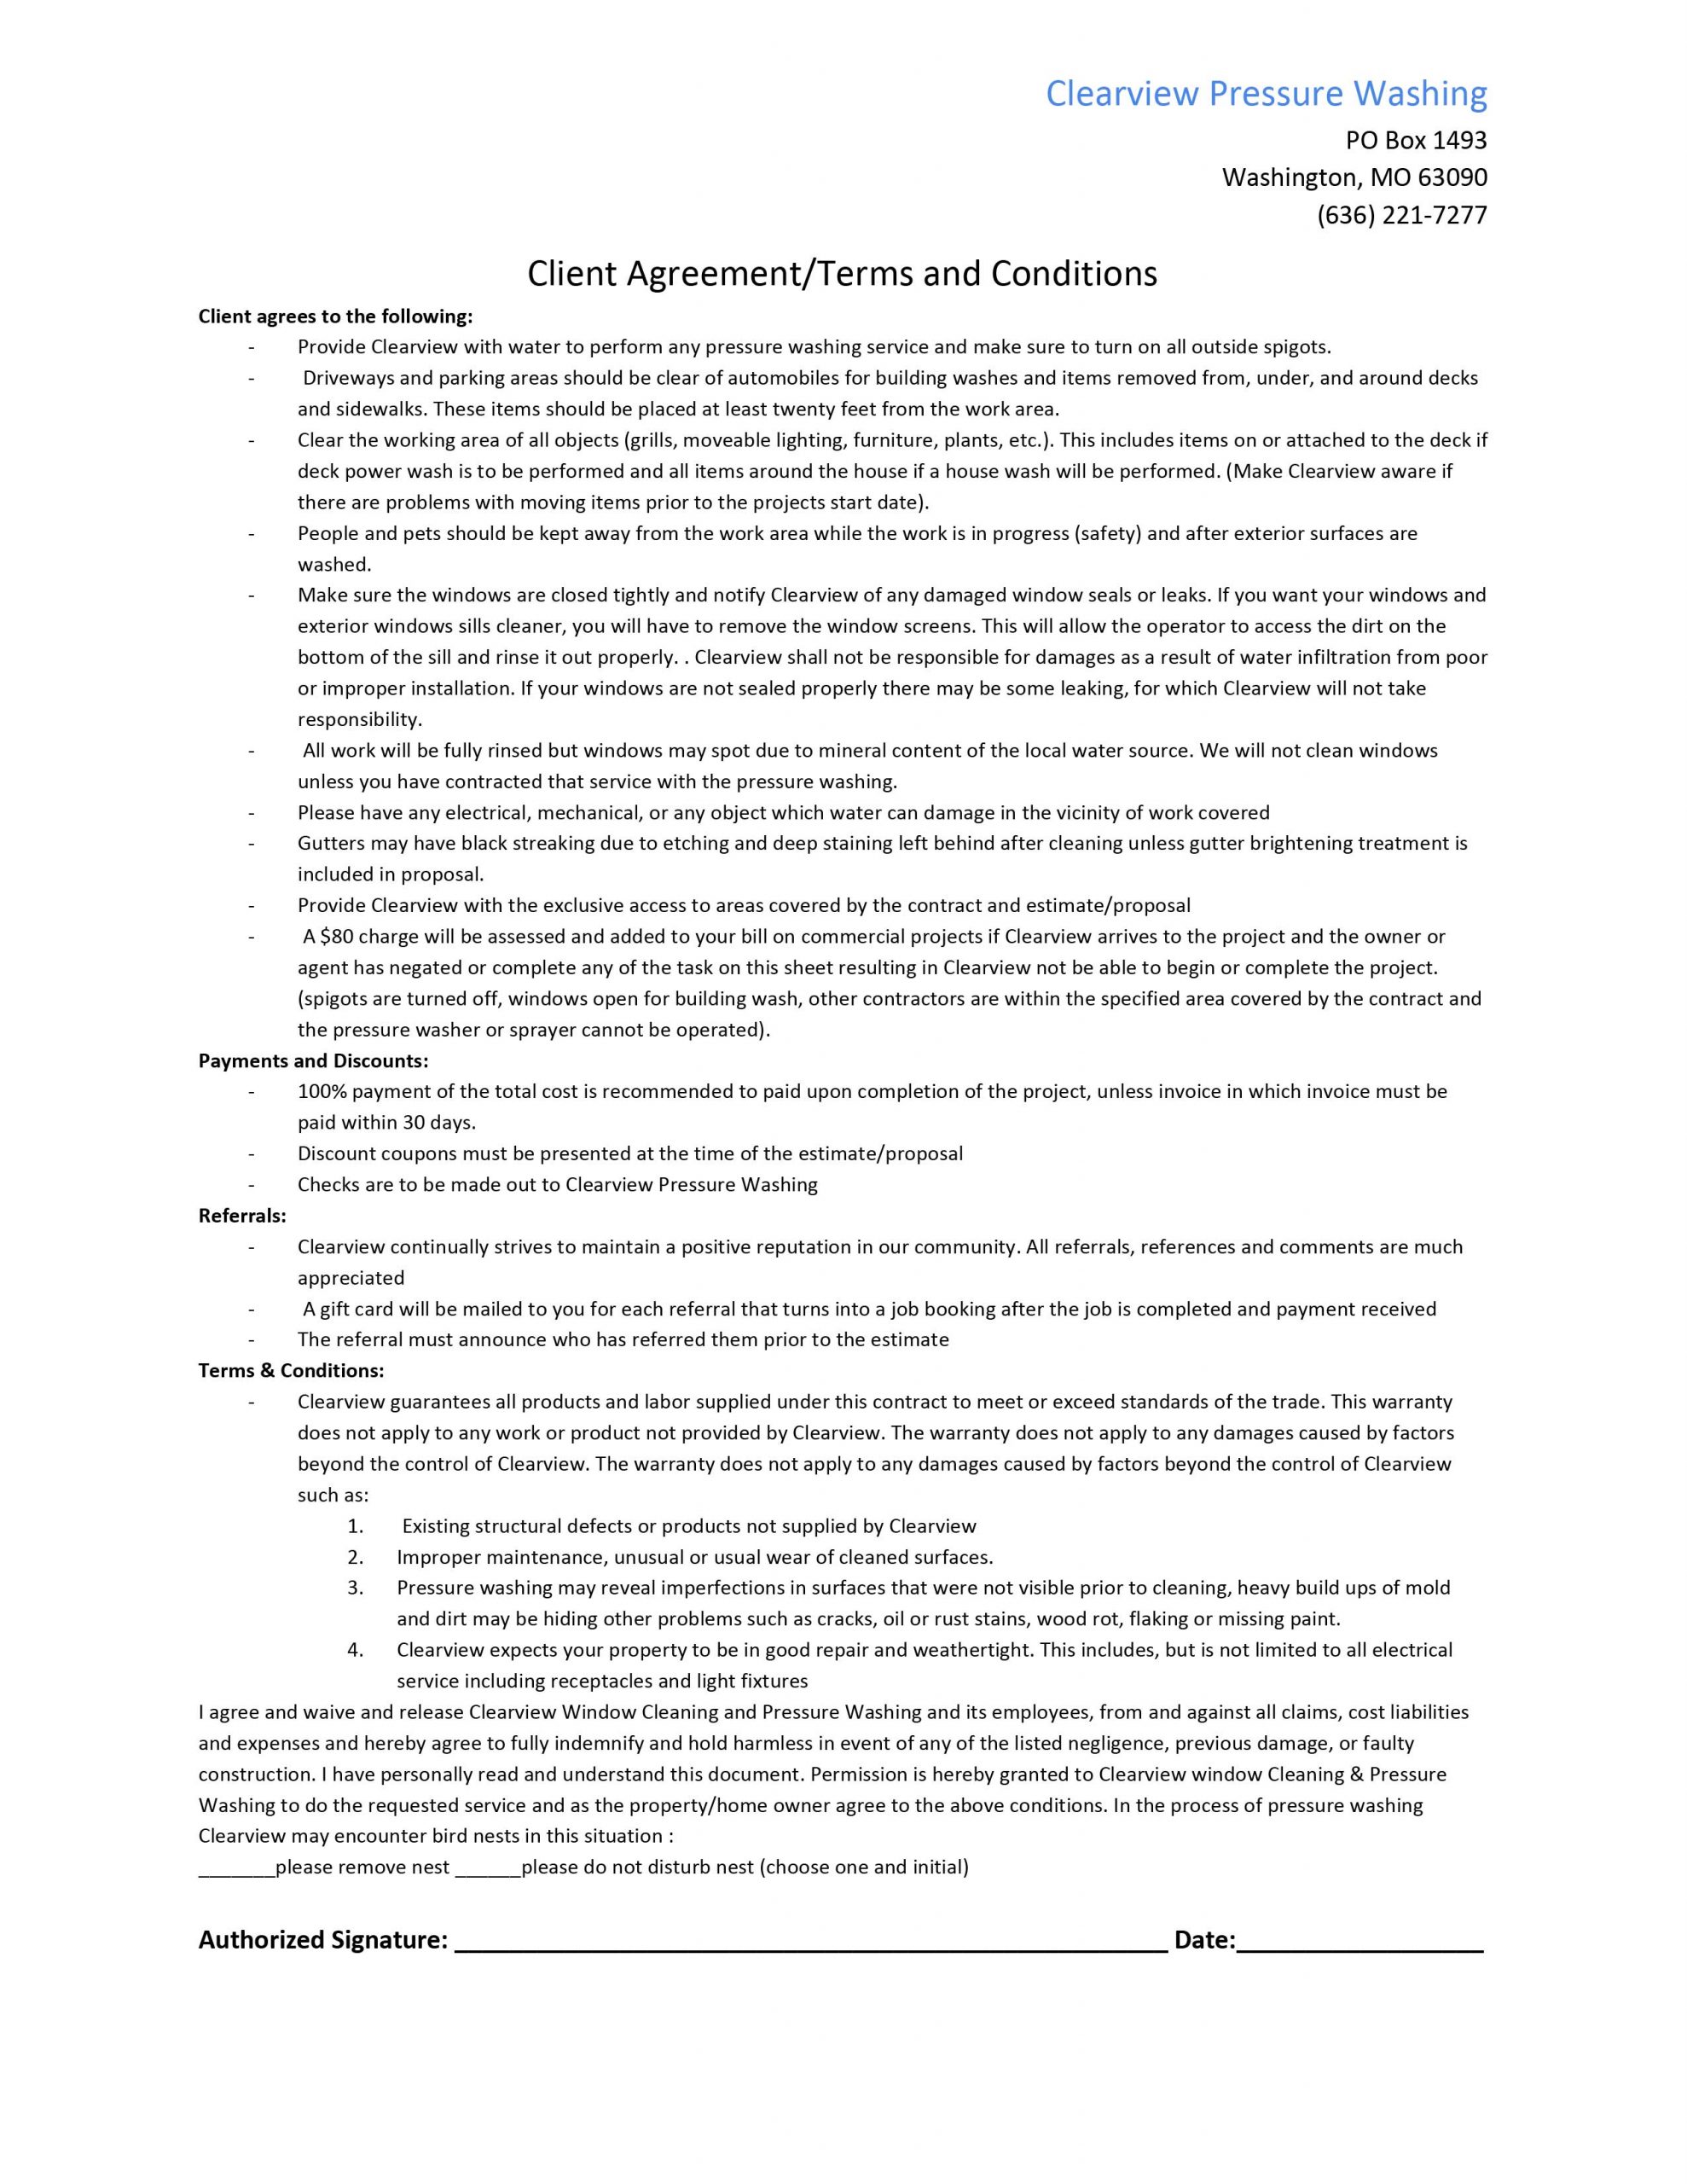 Clearview-PW-Client-Agreement